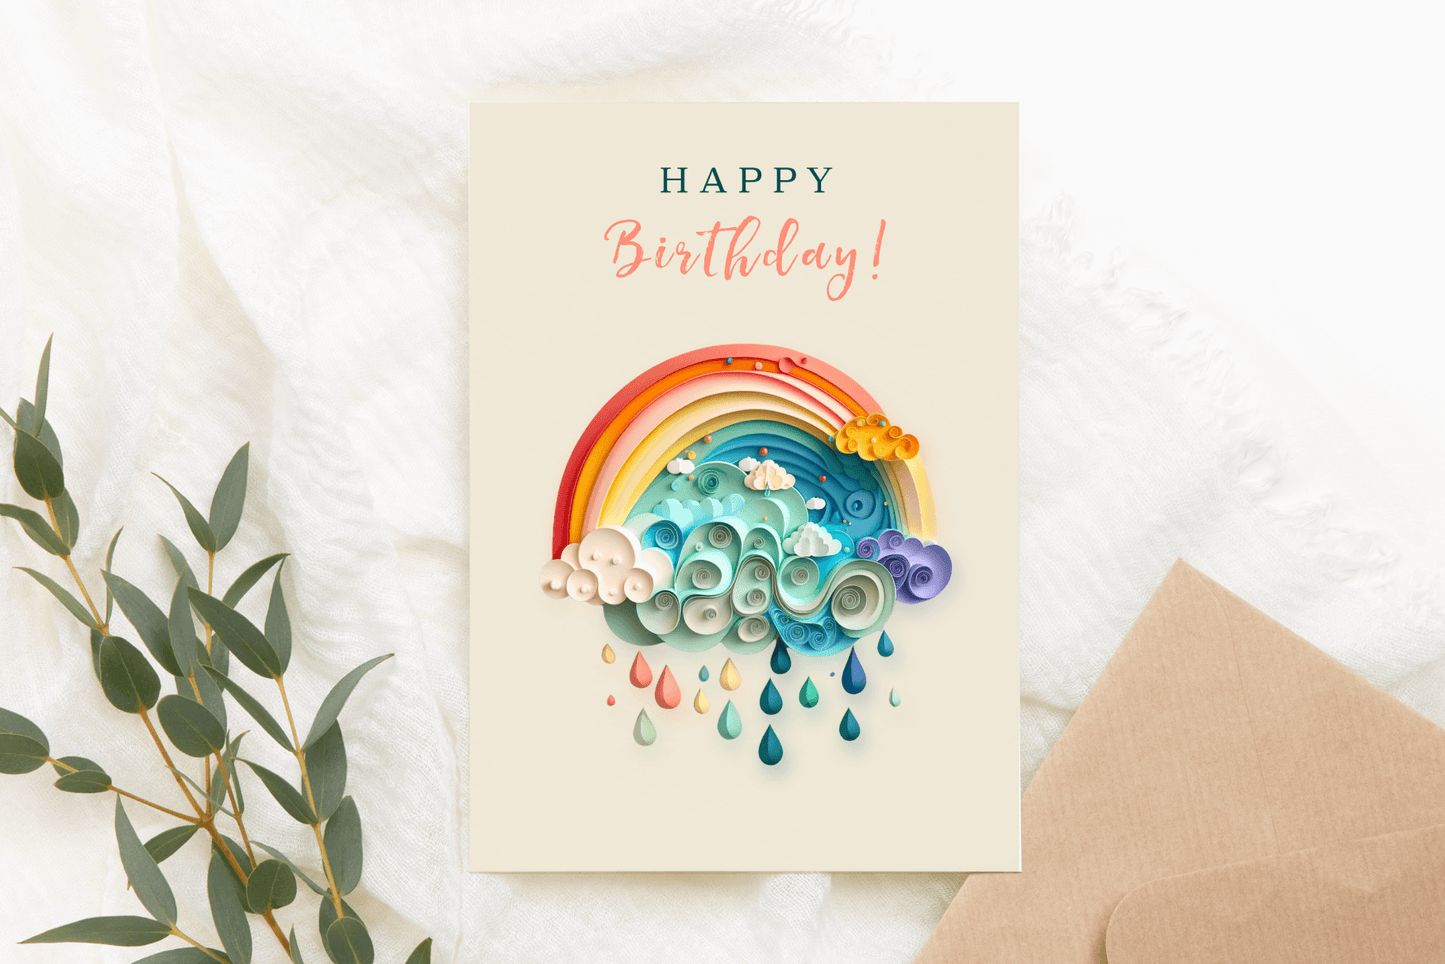 A birthday greeting cards with a rainbow